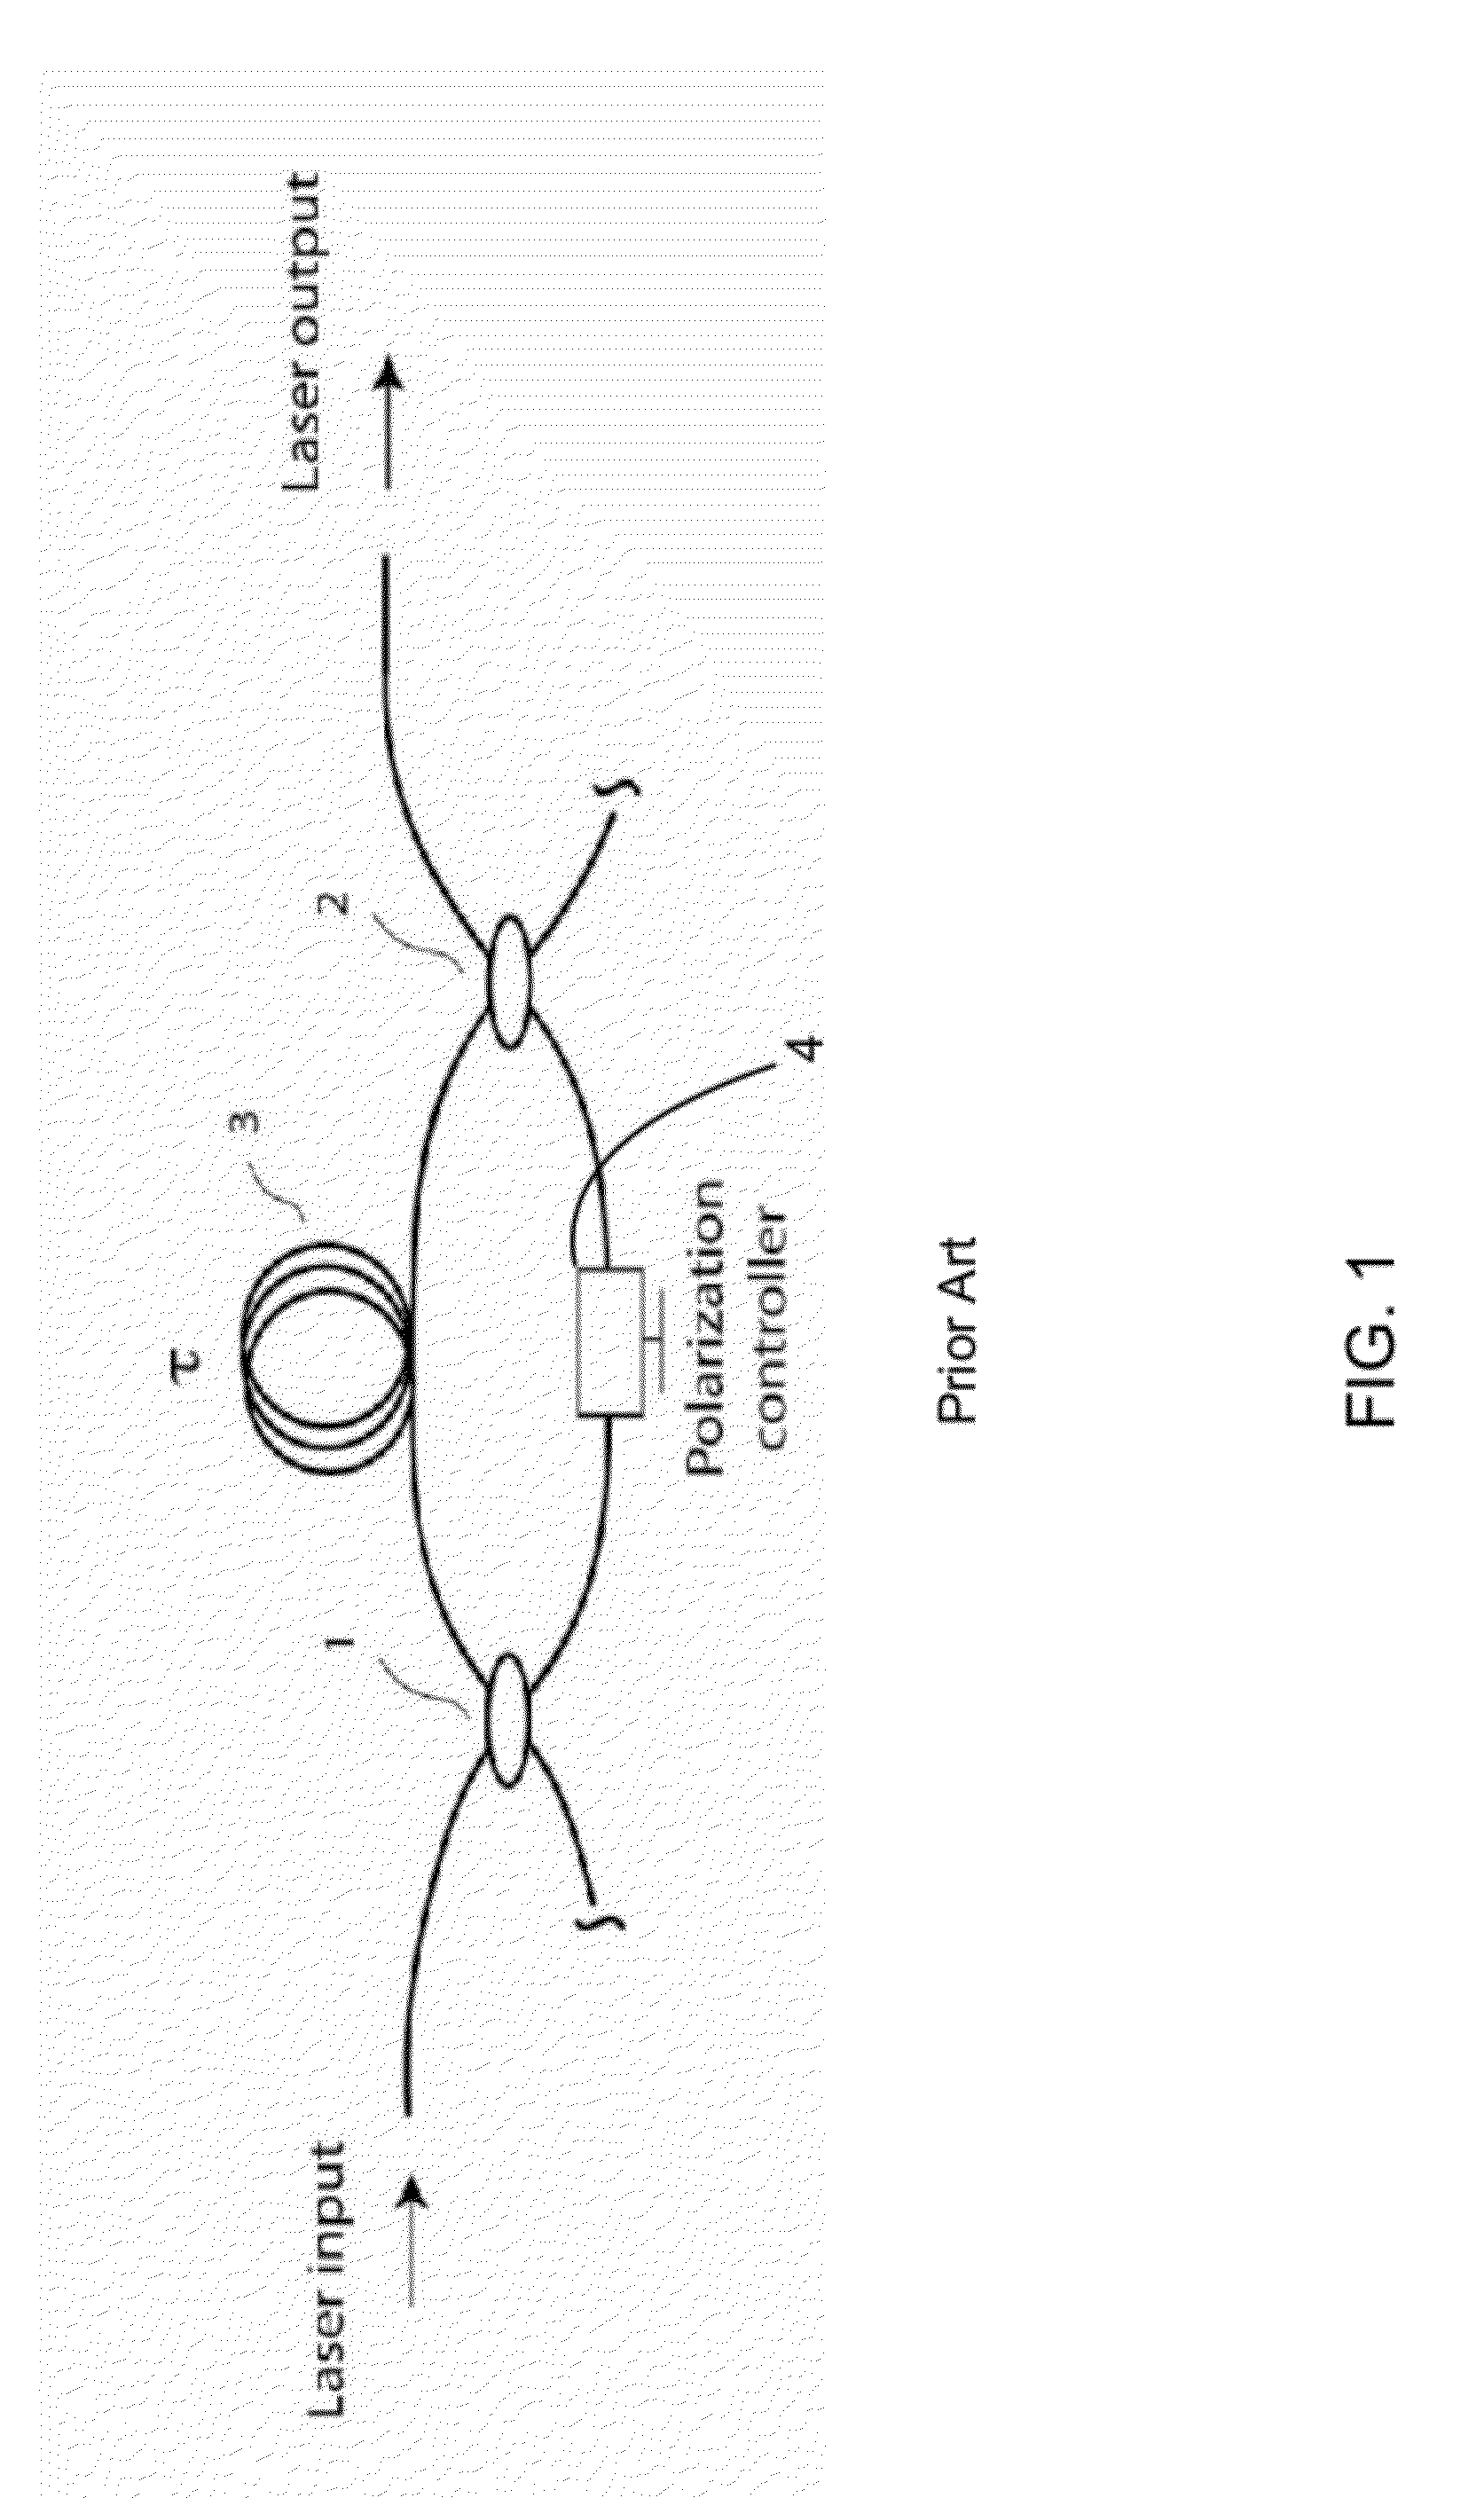 Optical Buffering Methods, Apparatus, and Systems for Increasing the Repetition Rate of Tunable Light Sources